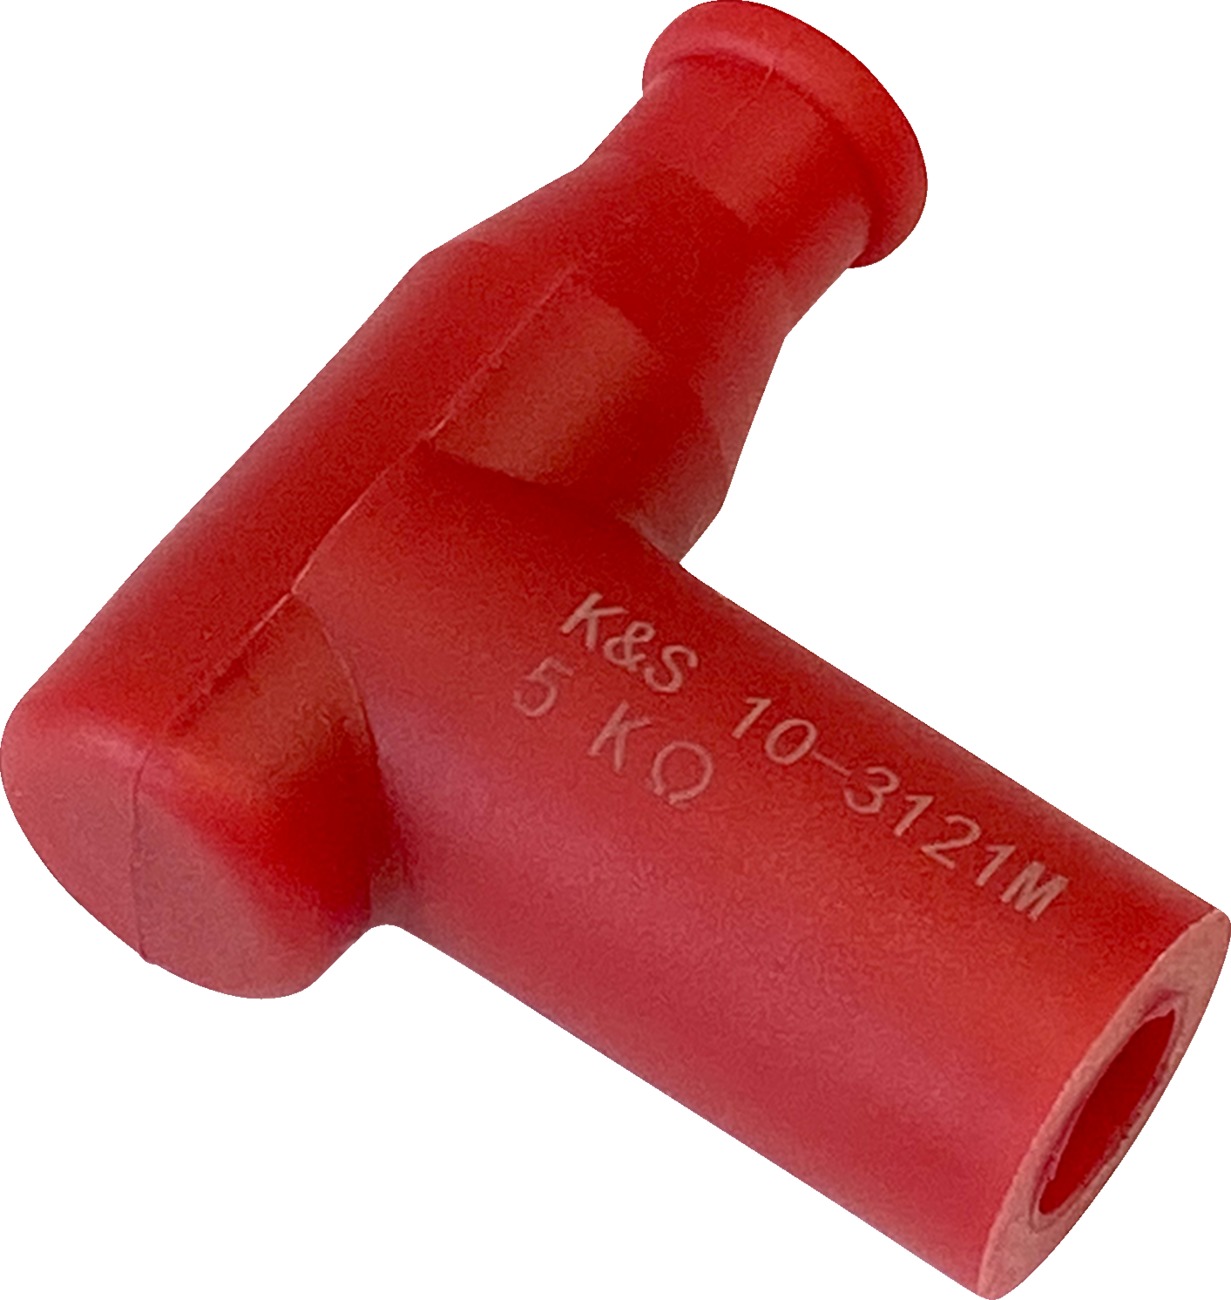 Red T Type Spark Plug Cap / Boot, 5k Ohm, 7-8mm Wire - Replaces NGK 8955 & TB05EM-R - Click Image to Close